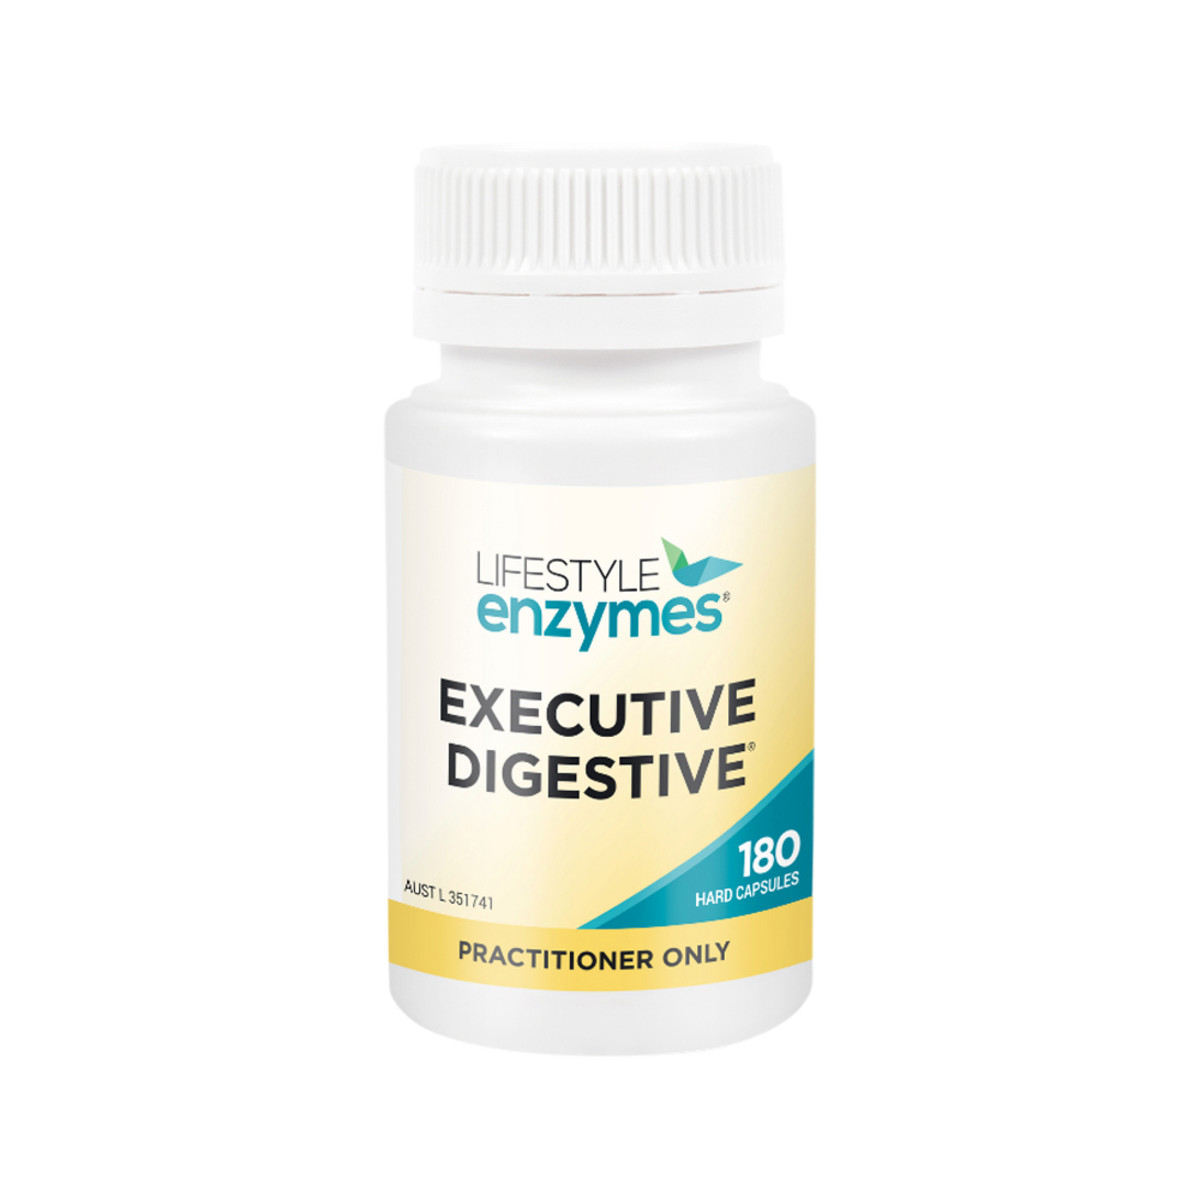 LIFESTYLE ENZYMES - Executive Digestive